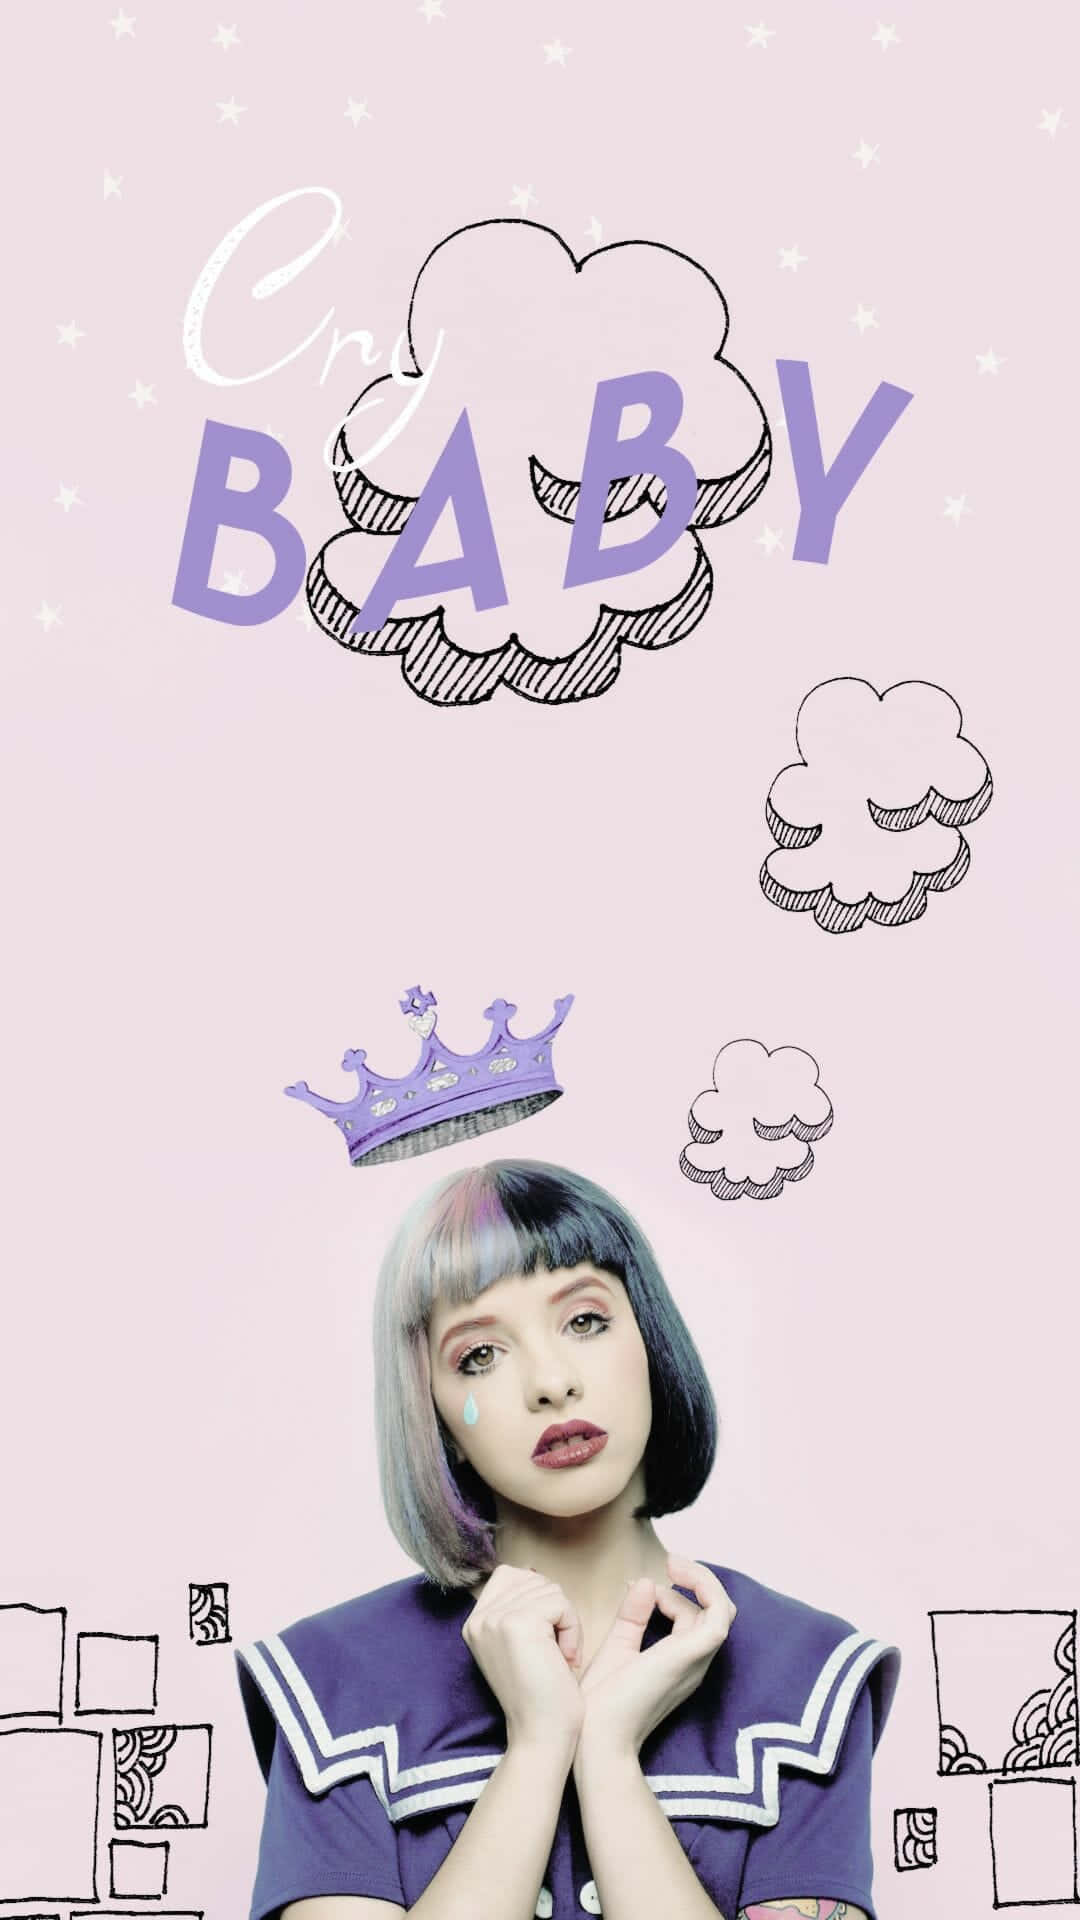 Young singer-songwriter Melanie Martinez looking gorgeous with her signature edgy hairstyle. Wallpaper